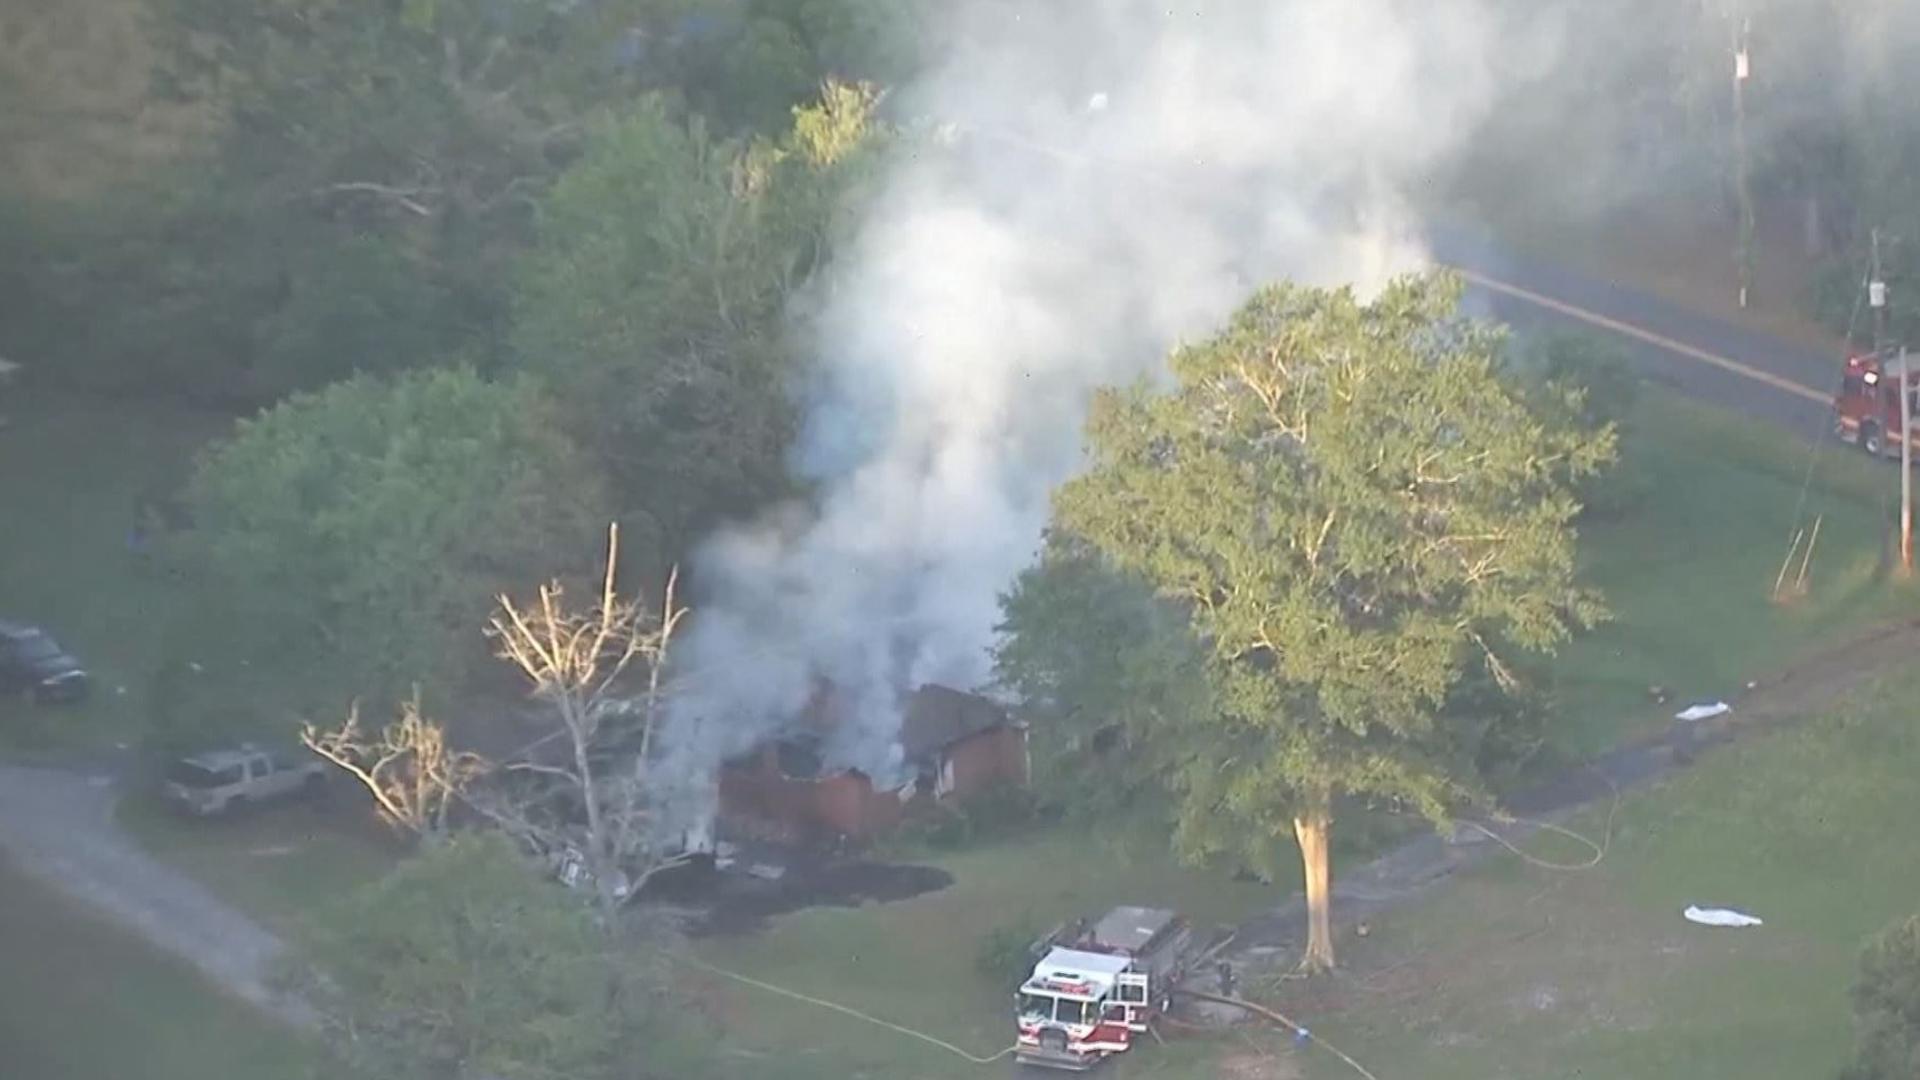 Coweta County Fire crews are currently working to put out flames at a house on Macedonia Road in Newnan Monday morning.